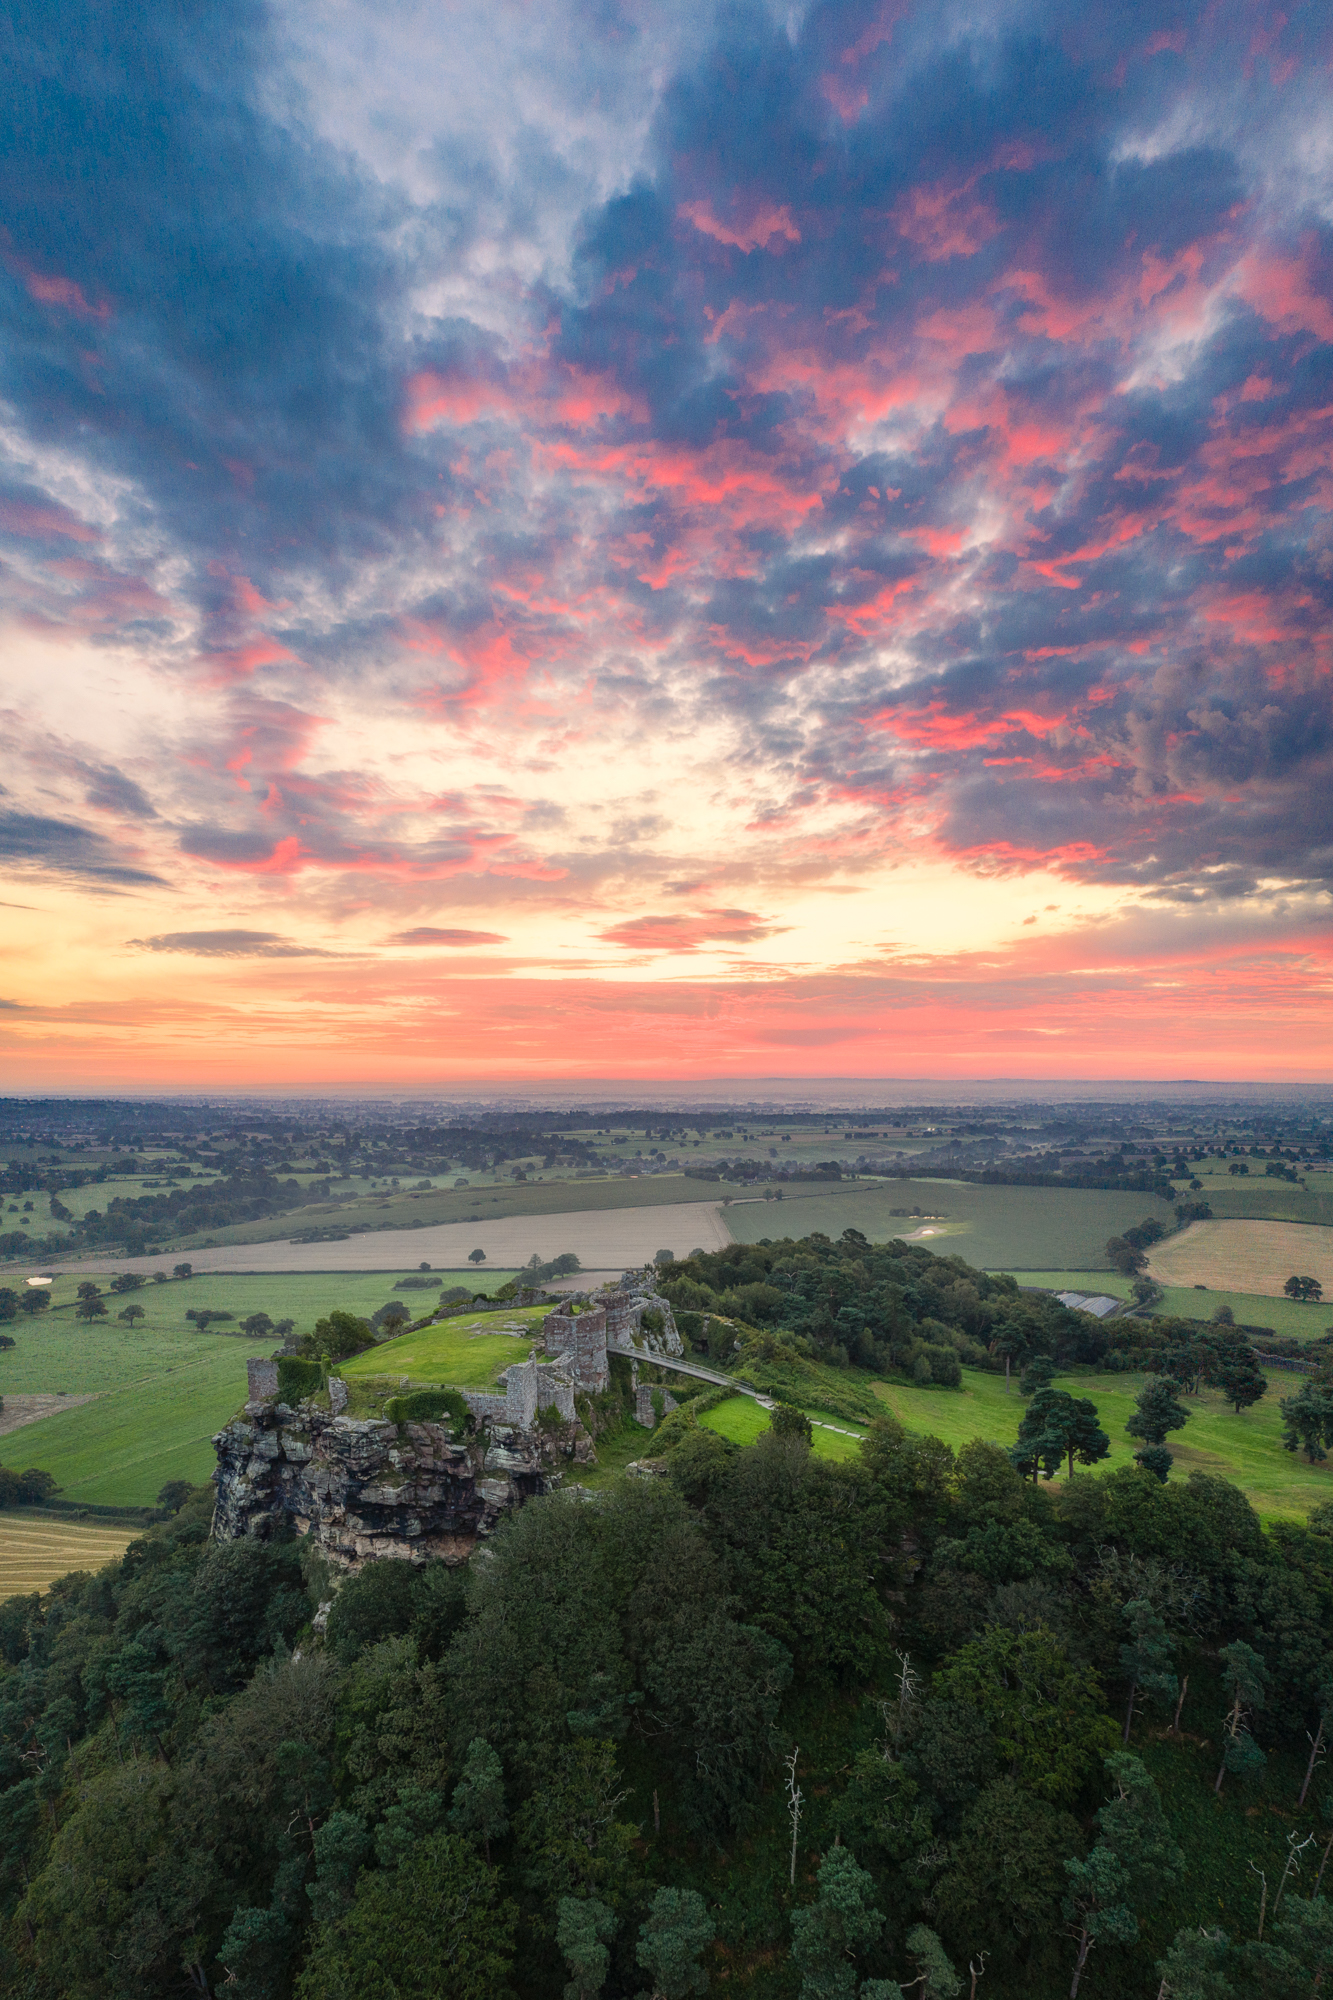 An example of a stitched together portrait image taken on a drone